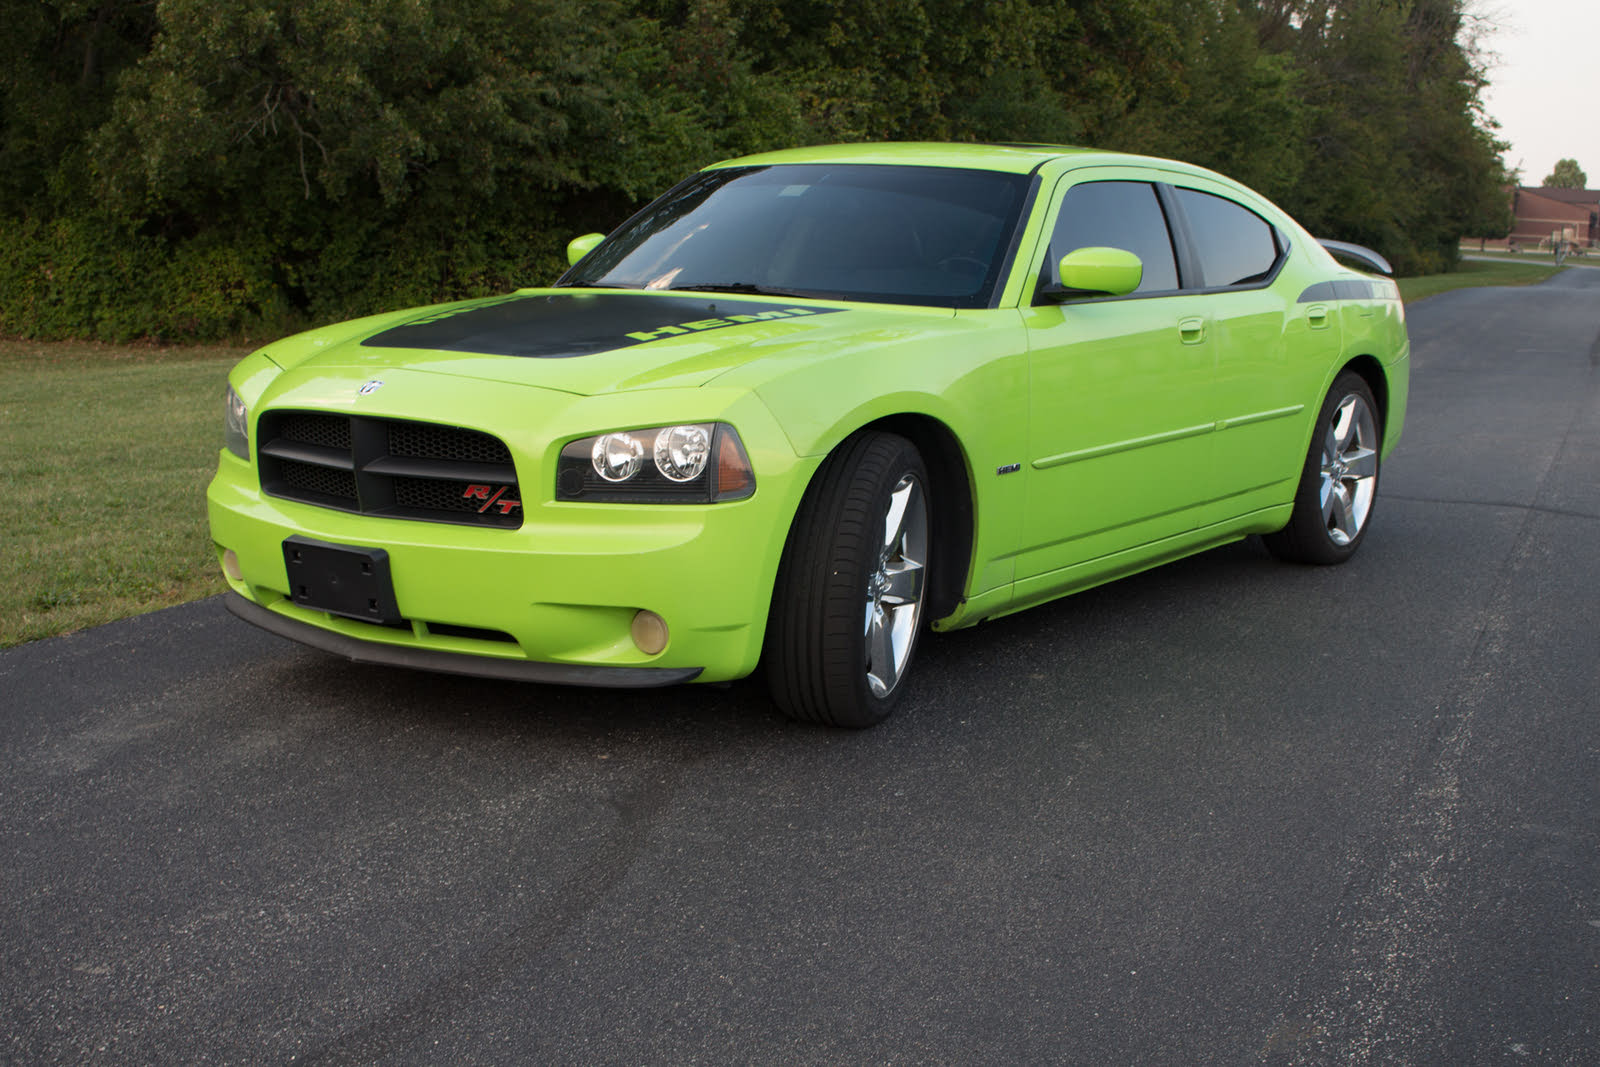 2007 Dodge Charger: Prices, Reviews & Pictures - CarGurus